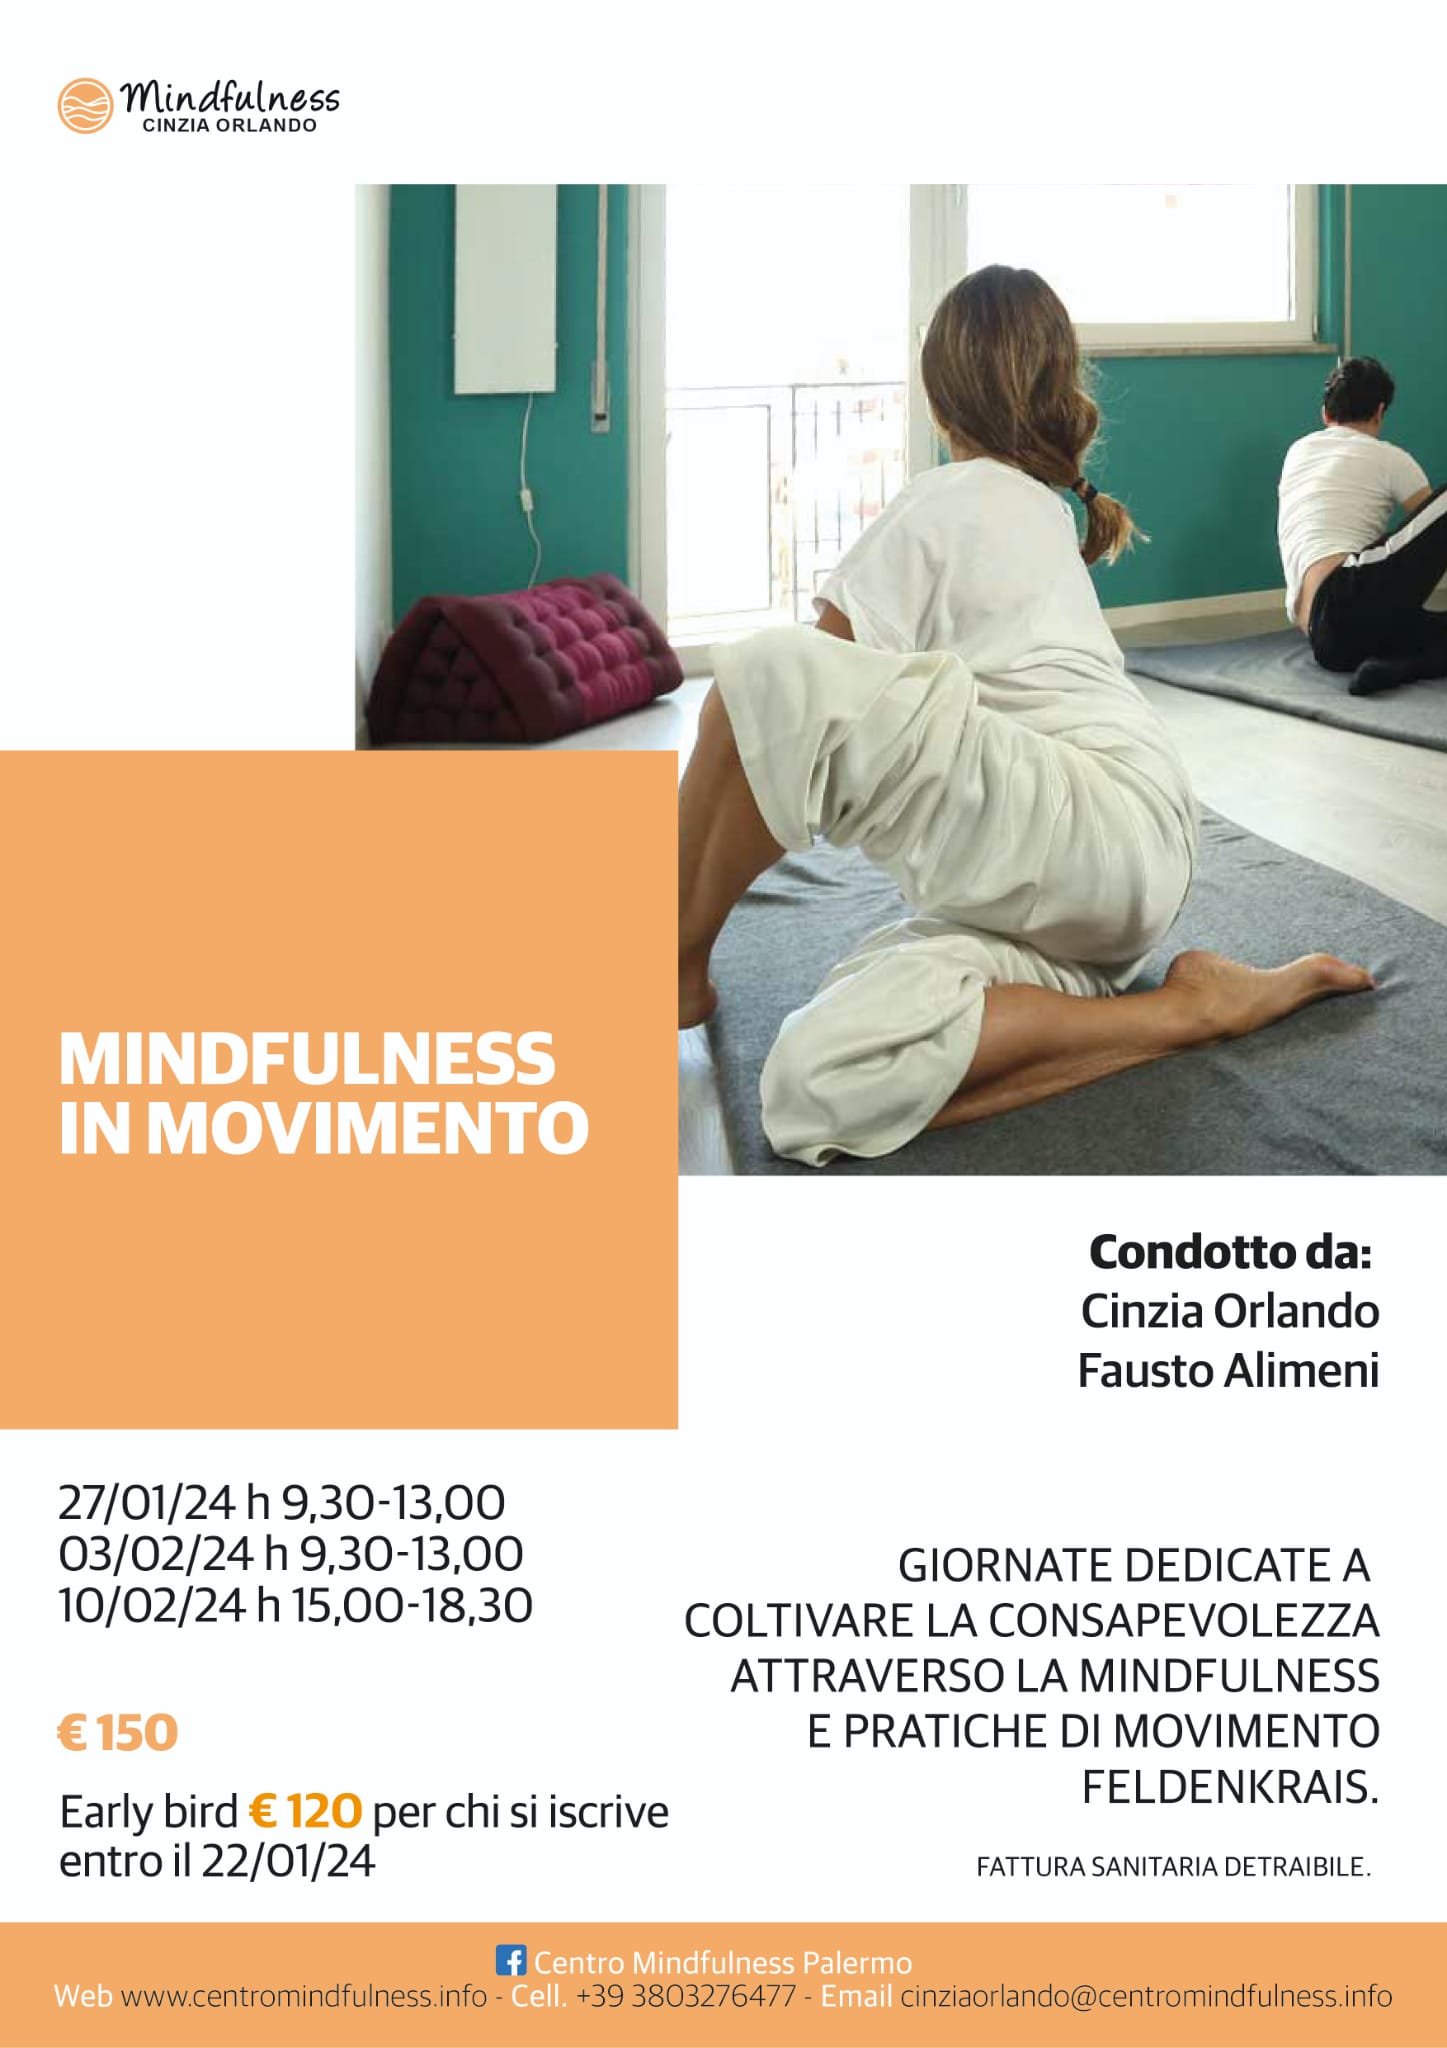 Mindfulness in movimento